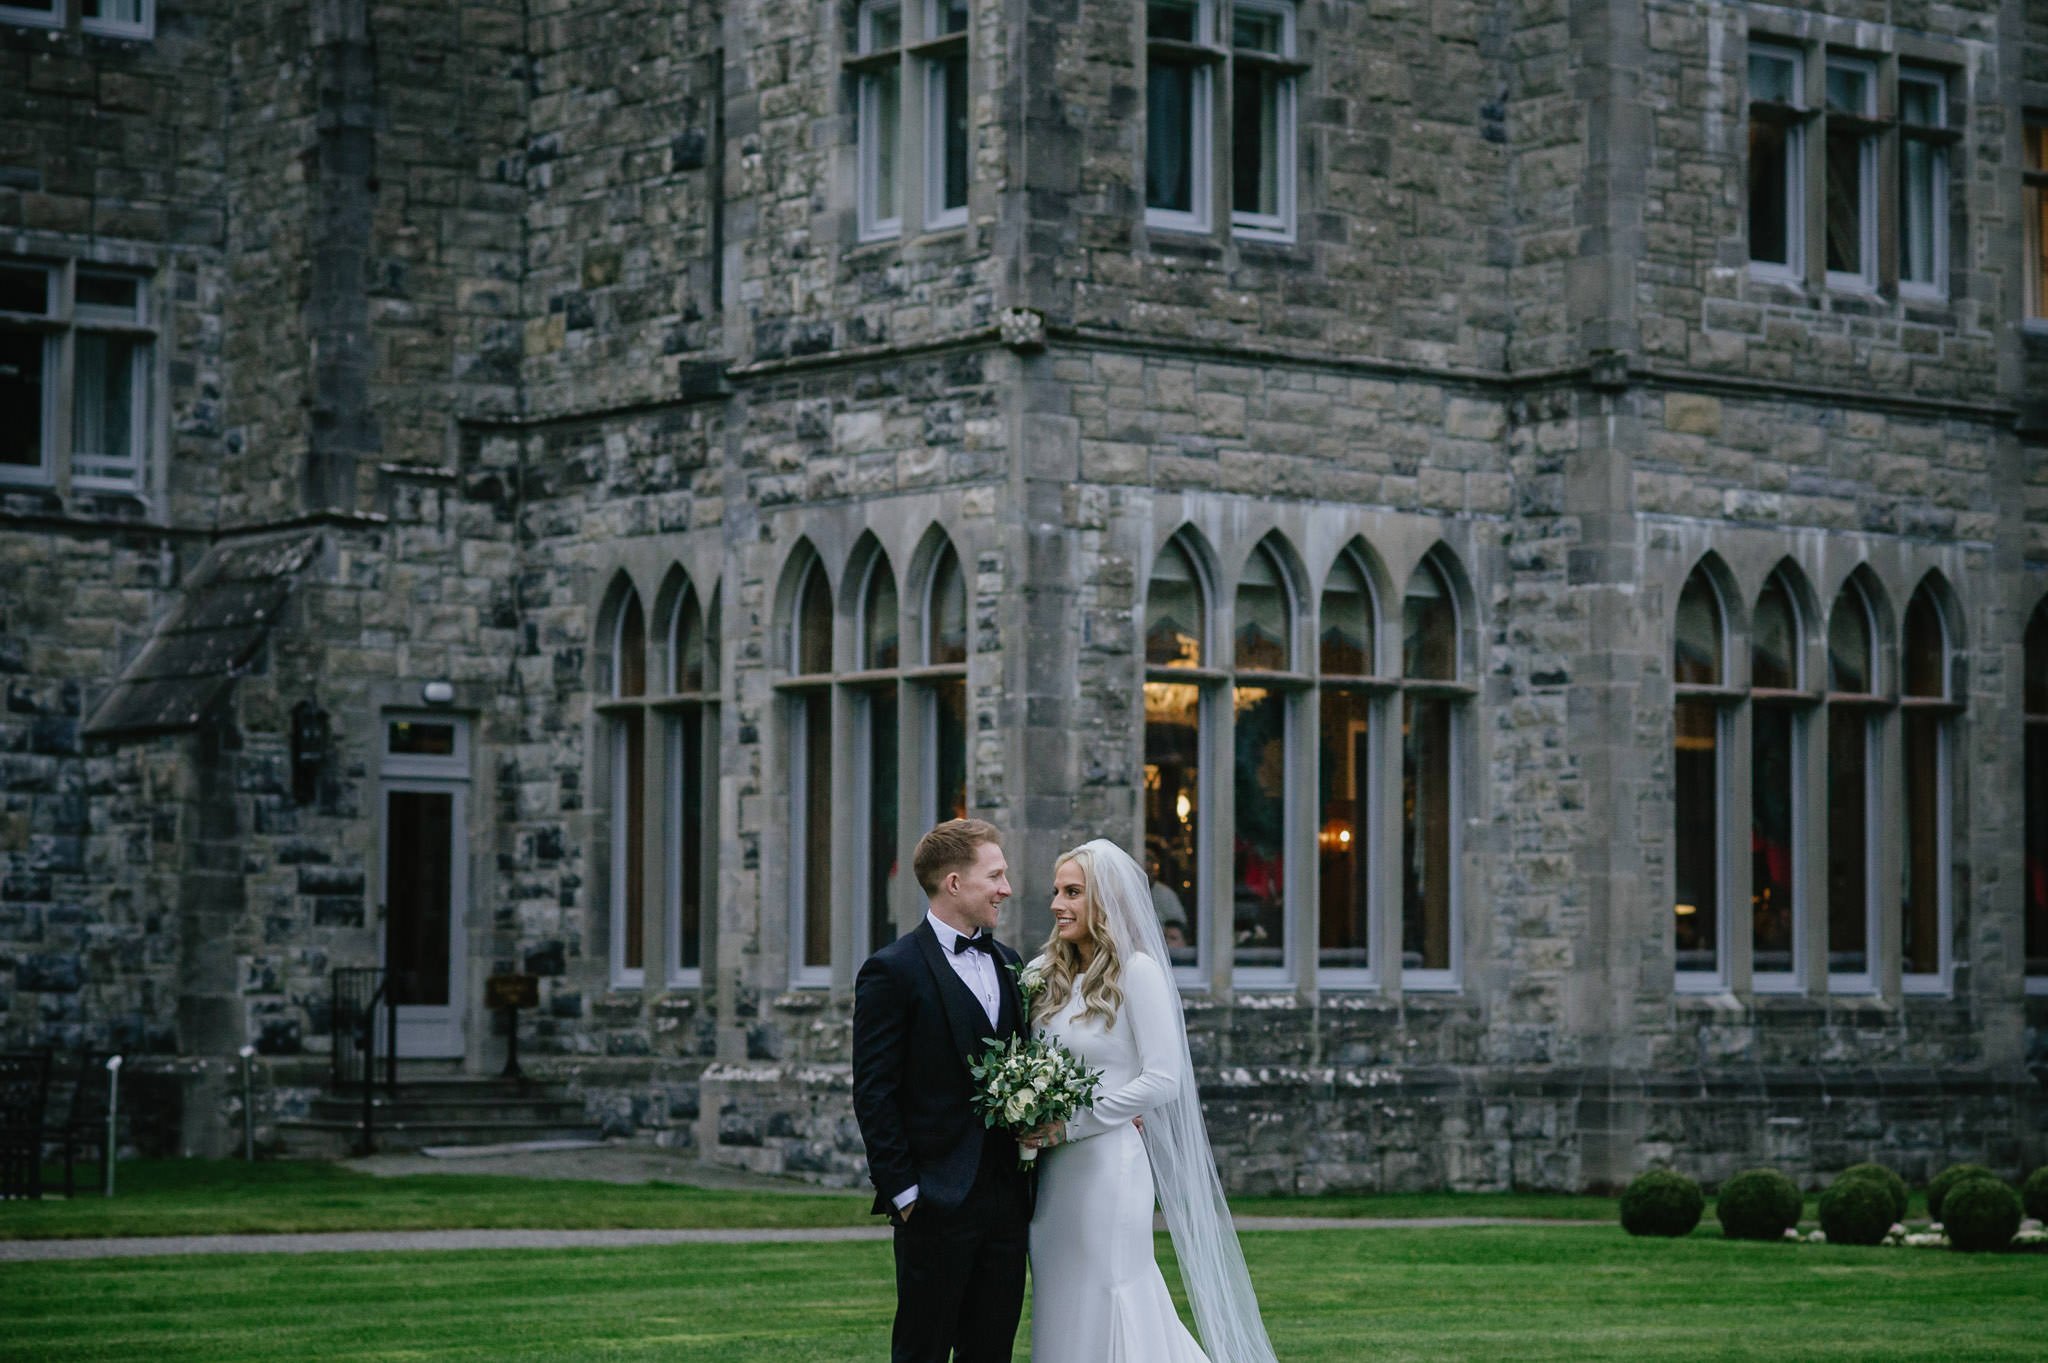 Bride and groom at Ashford Castle on their wedding day.